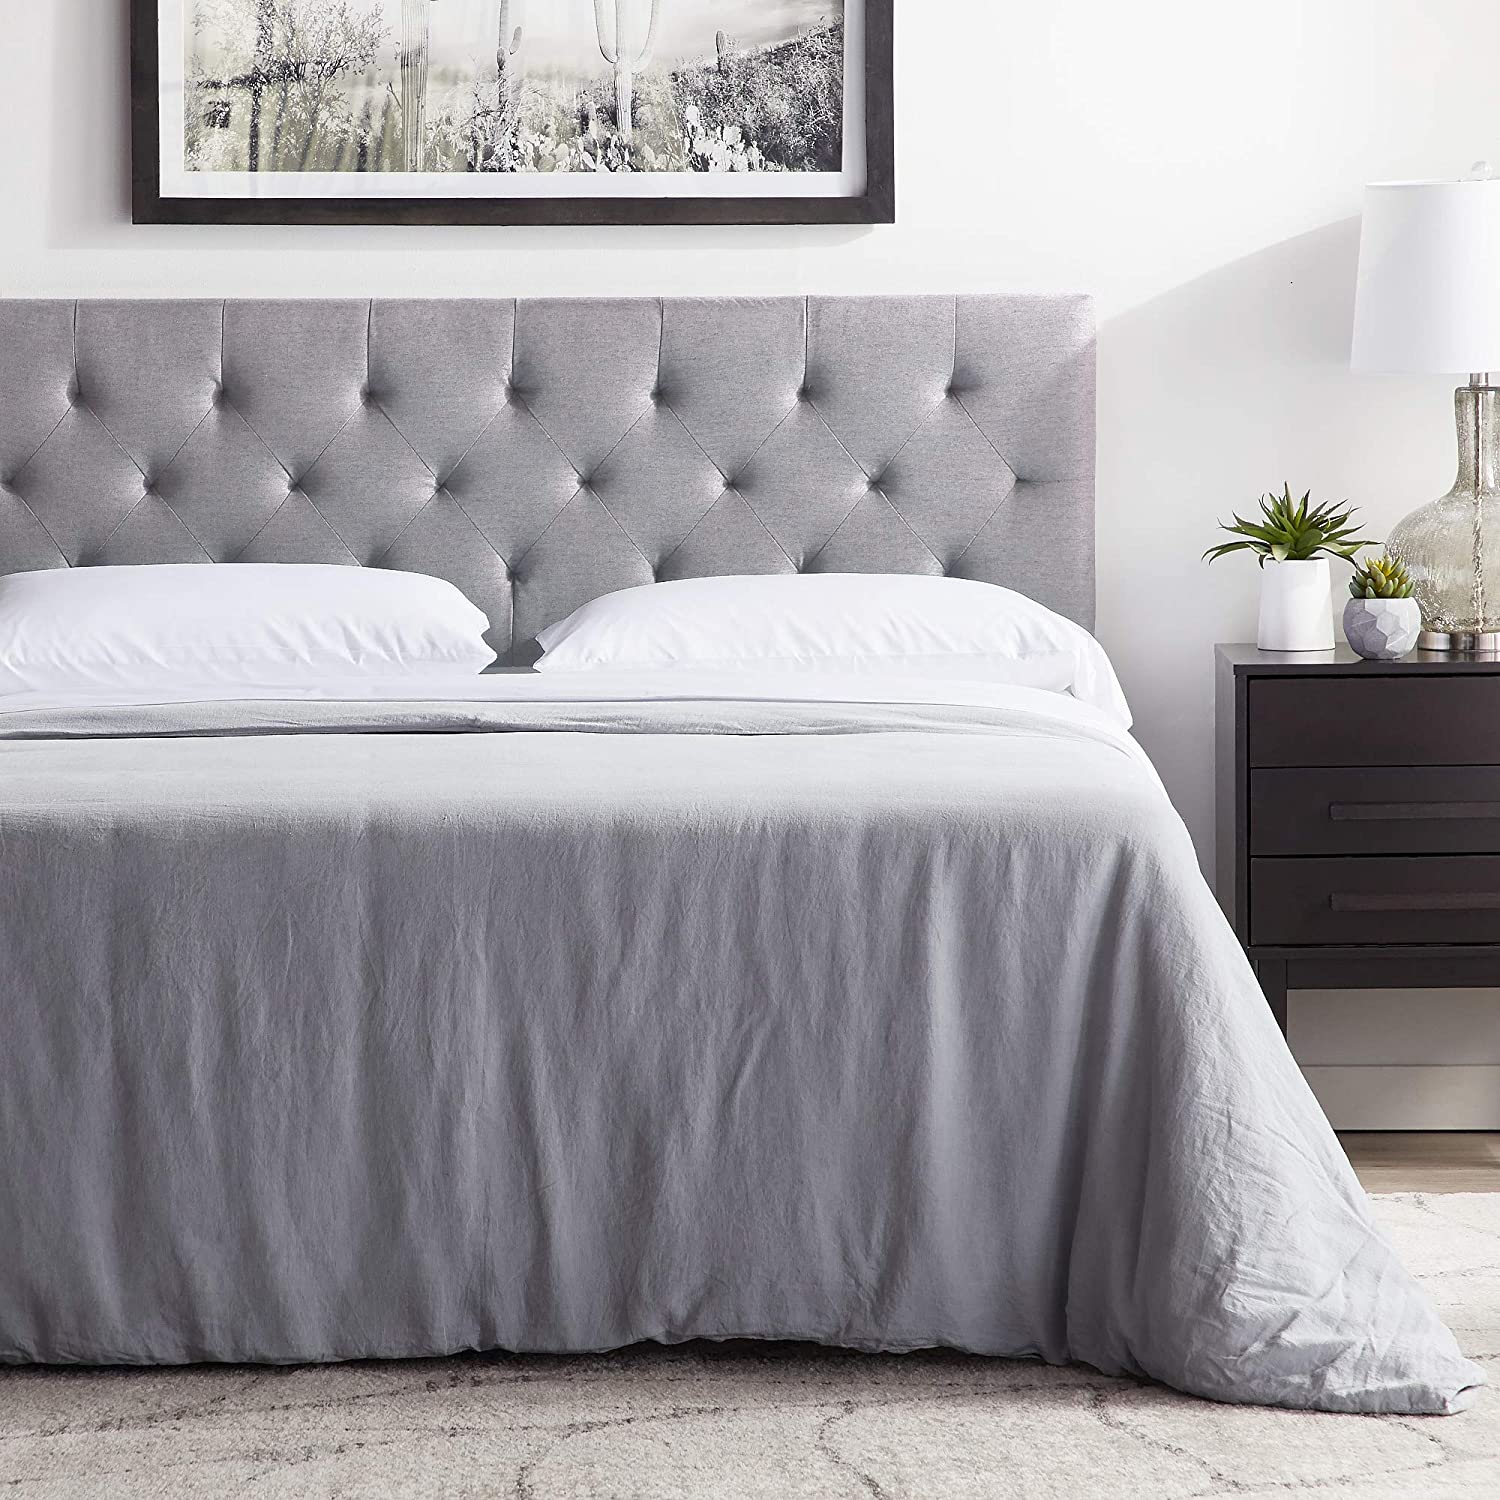 LUCID Tufted Mid-Rise Headboard For King Size Beds